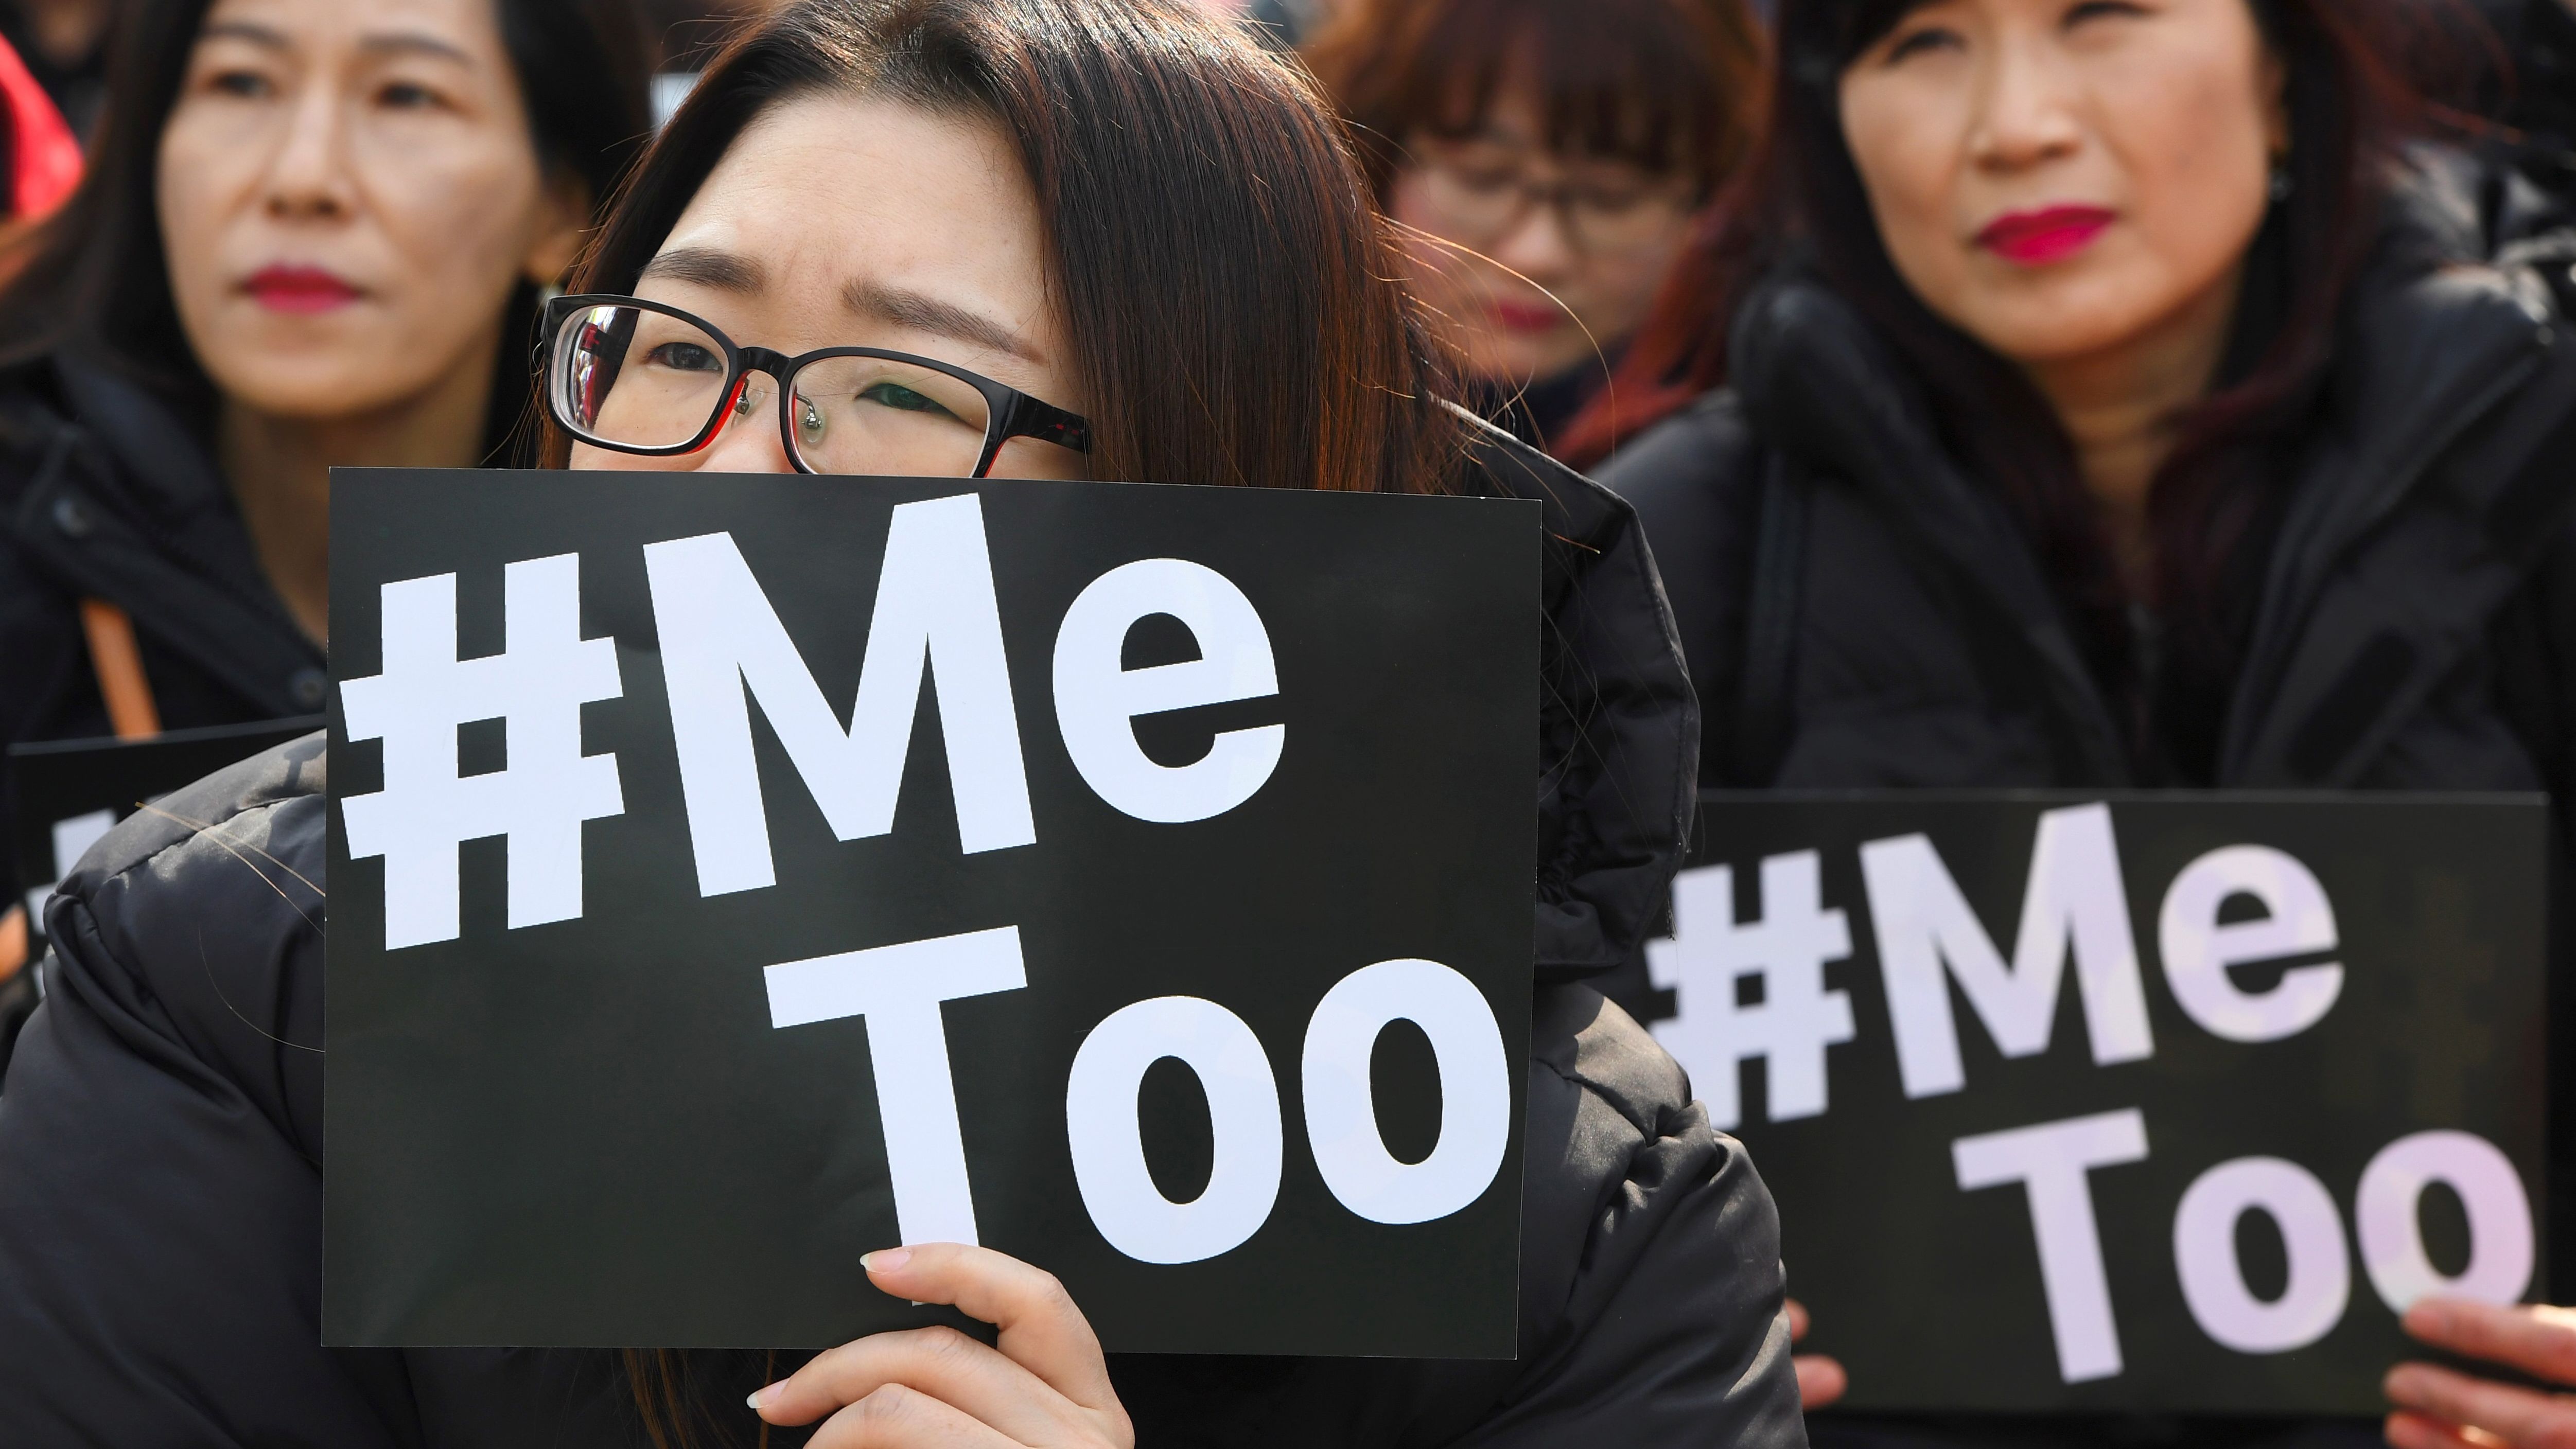 South Korean demonstrators hold banners during a rally to mark International Women's Day as part of the country's #MeToo movement in Seoul on